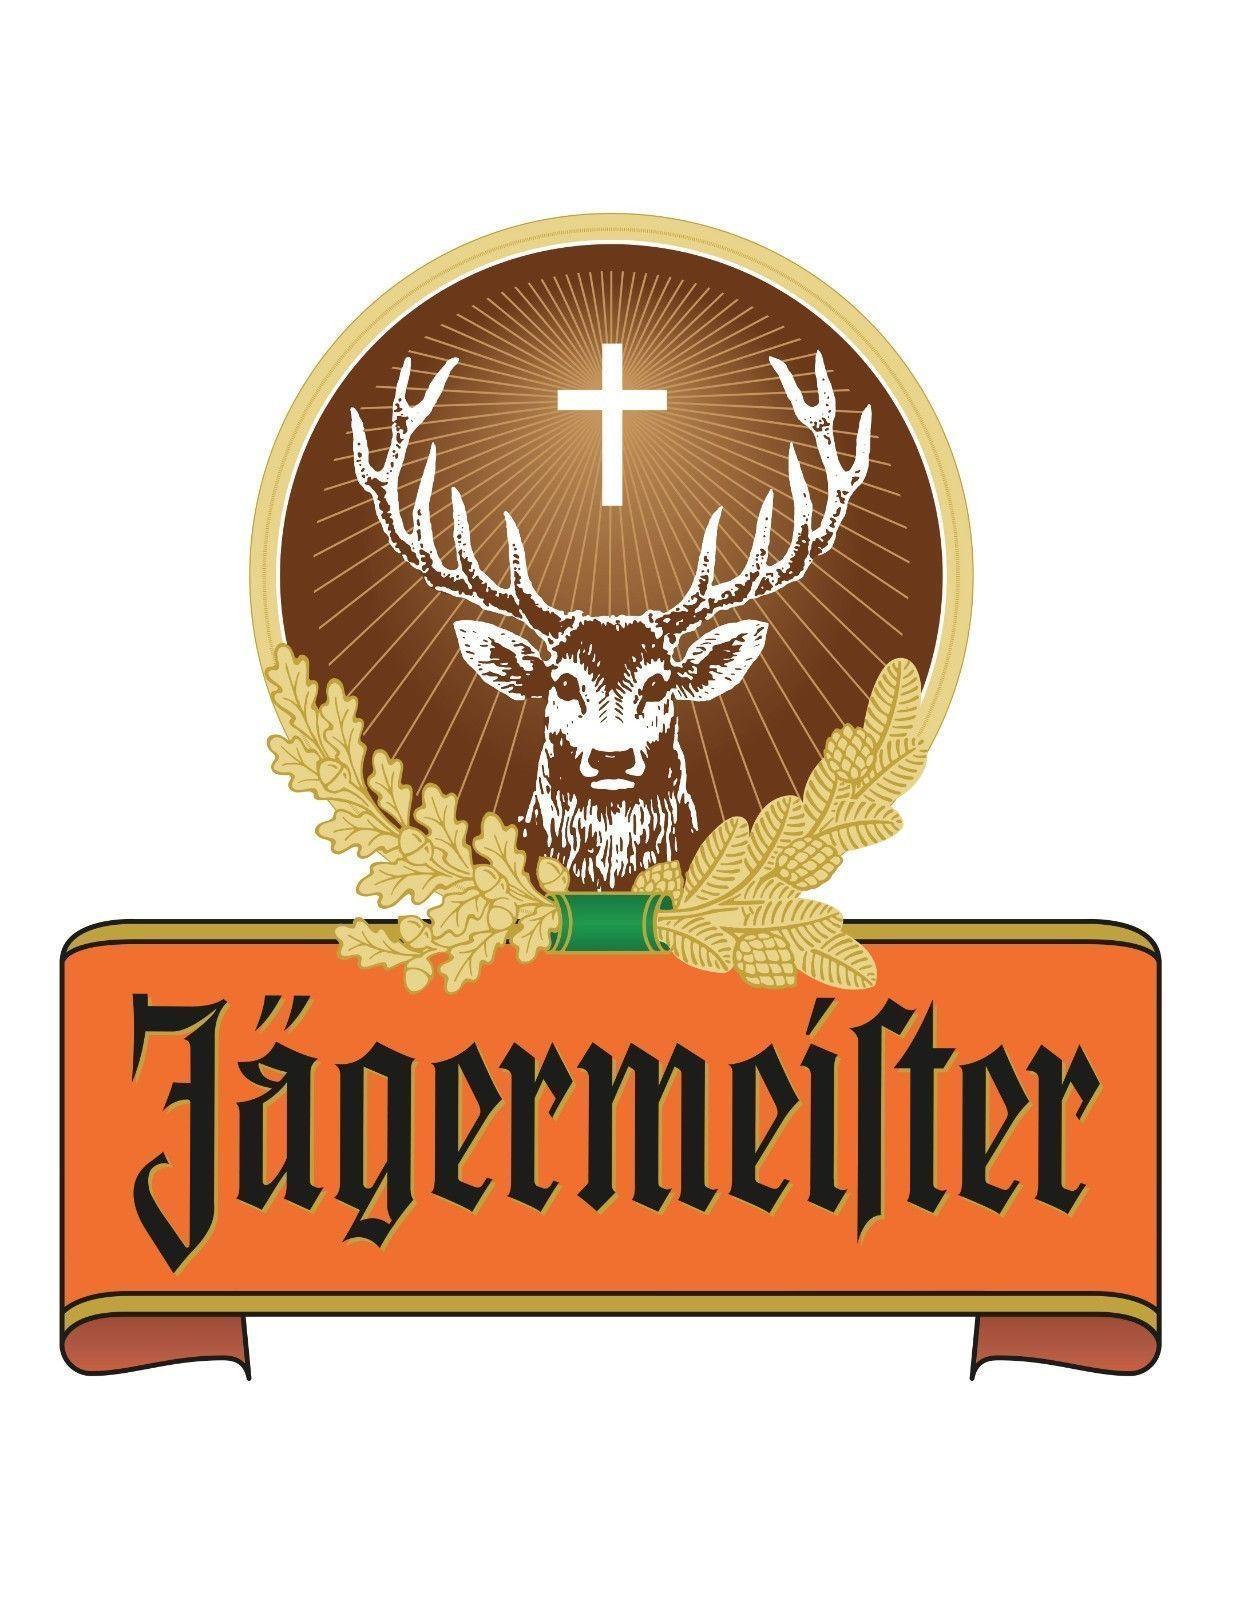 Jaegermeister Logo - Details about THE NORTH FACE Sticker Decal MANY SIZES Wall Truck Car ...